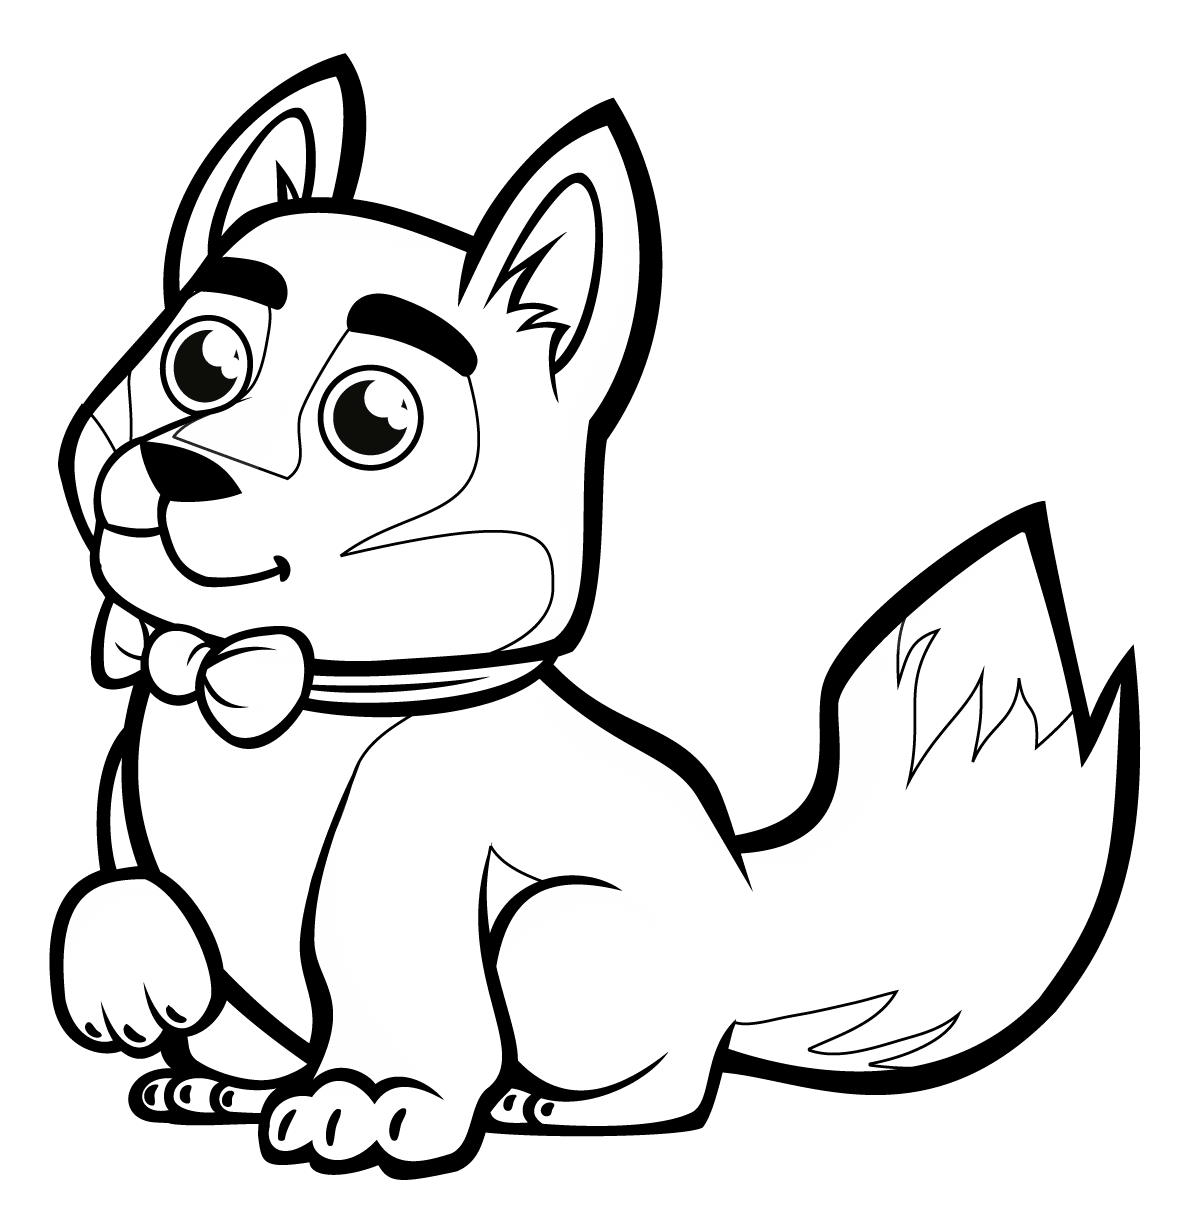 Cute Baby Husky with a Bowtie Coloring Page